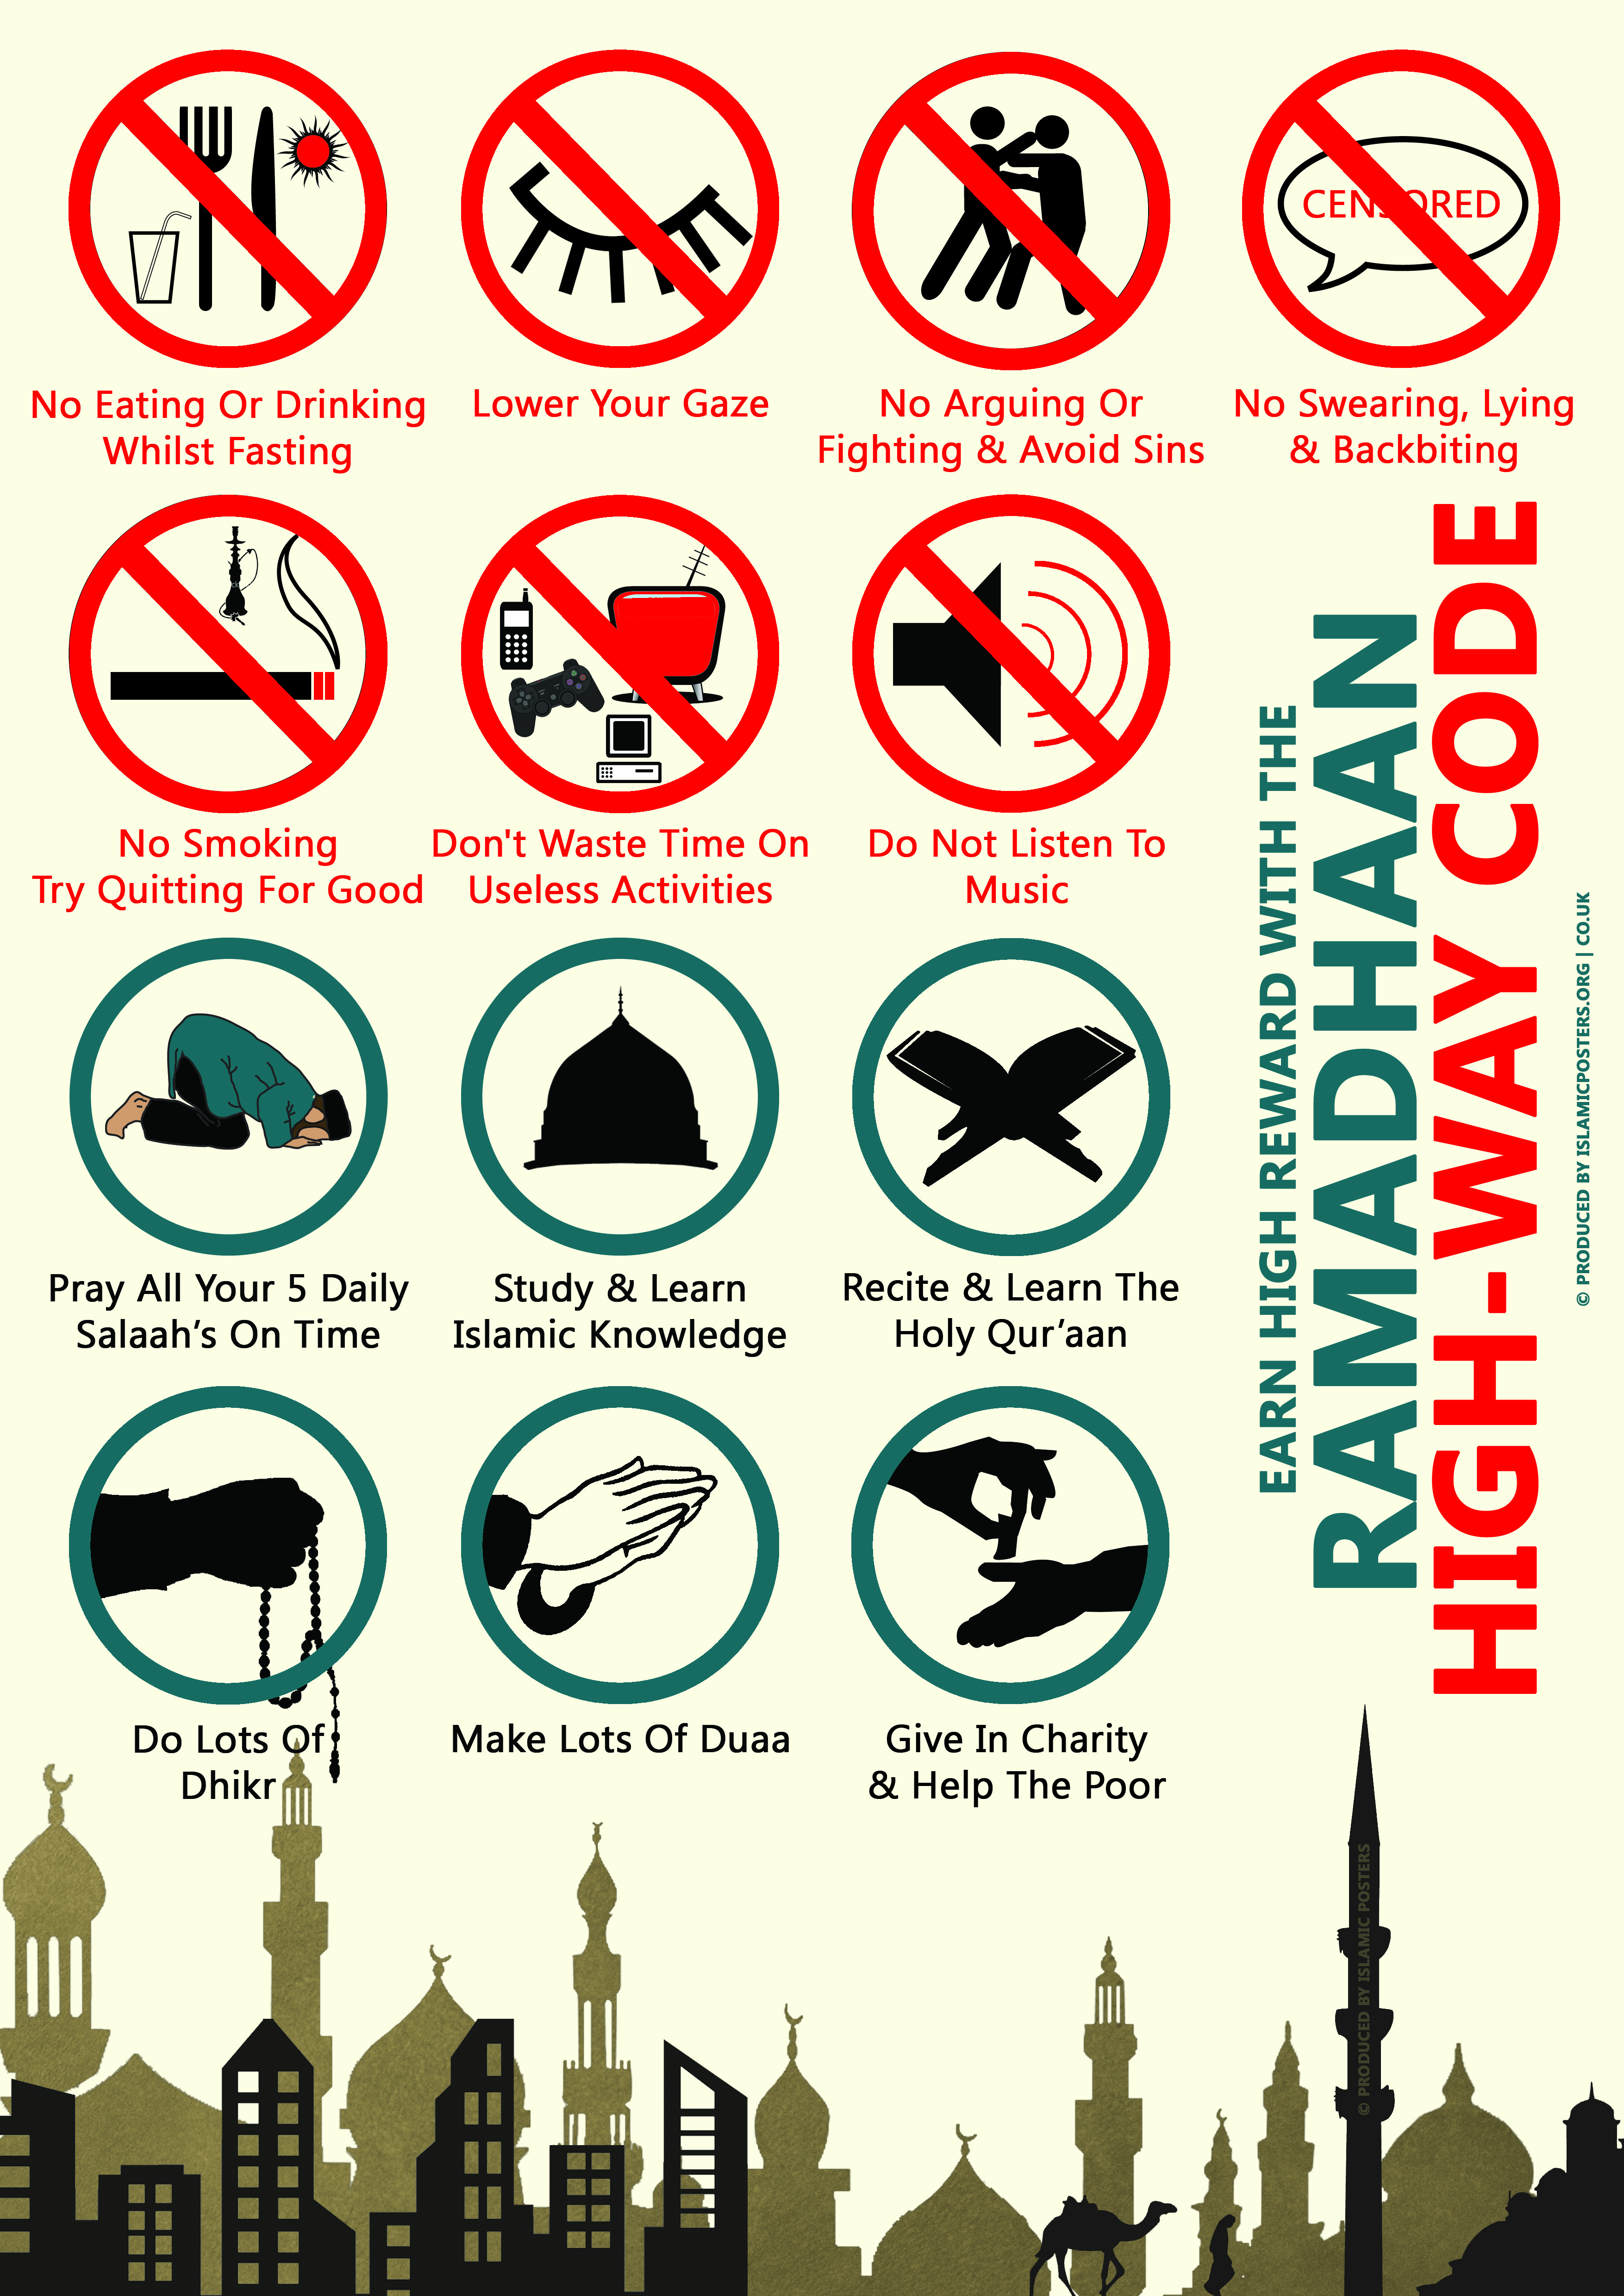 Download Islamic Posters: Prayer, Guidance, Alcohol, Music 